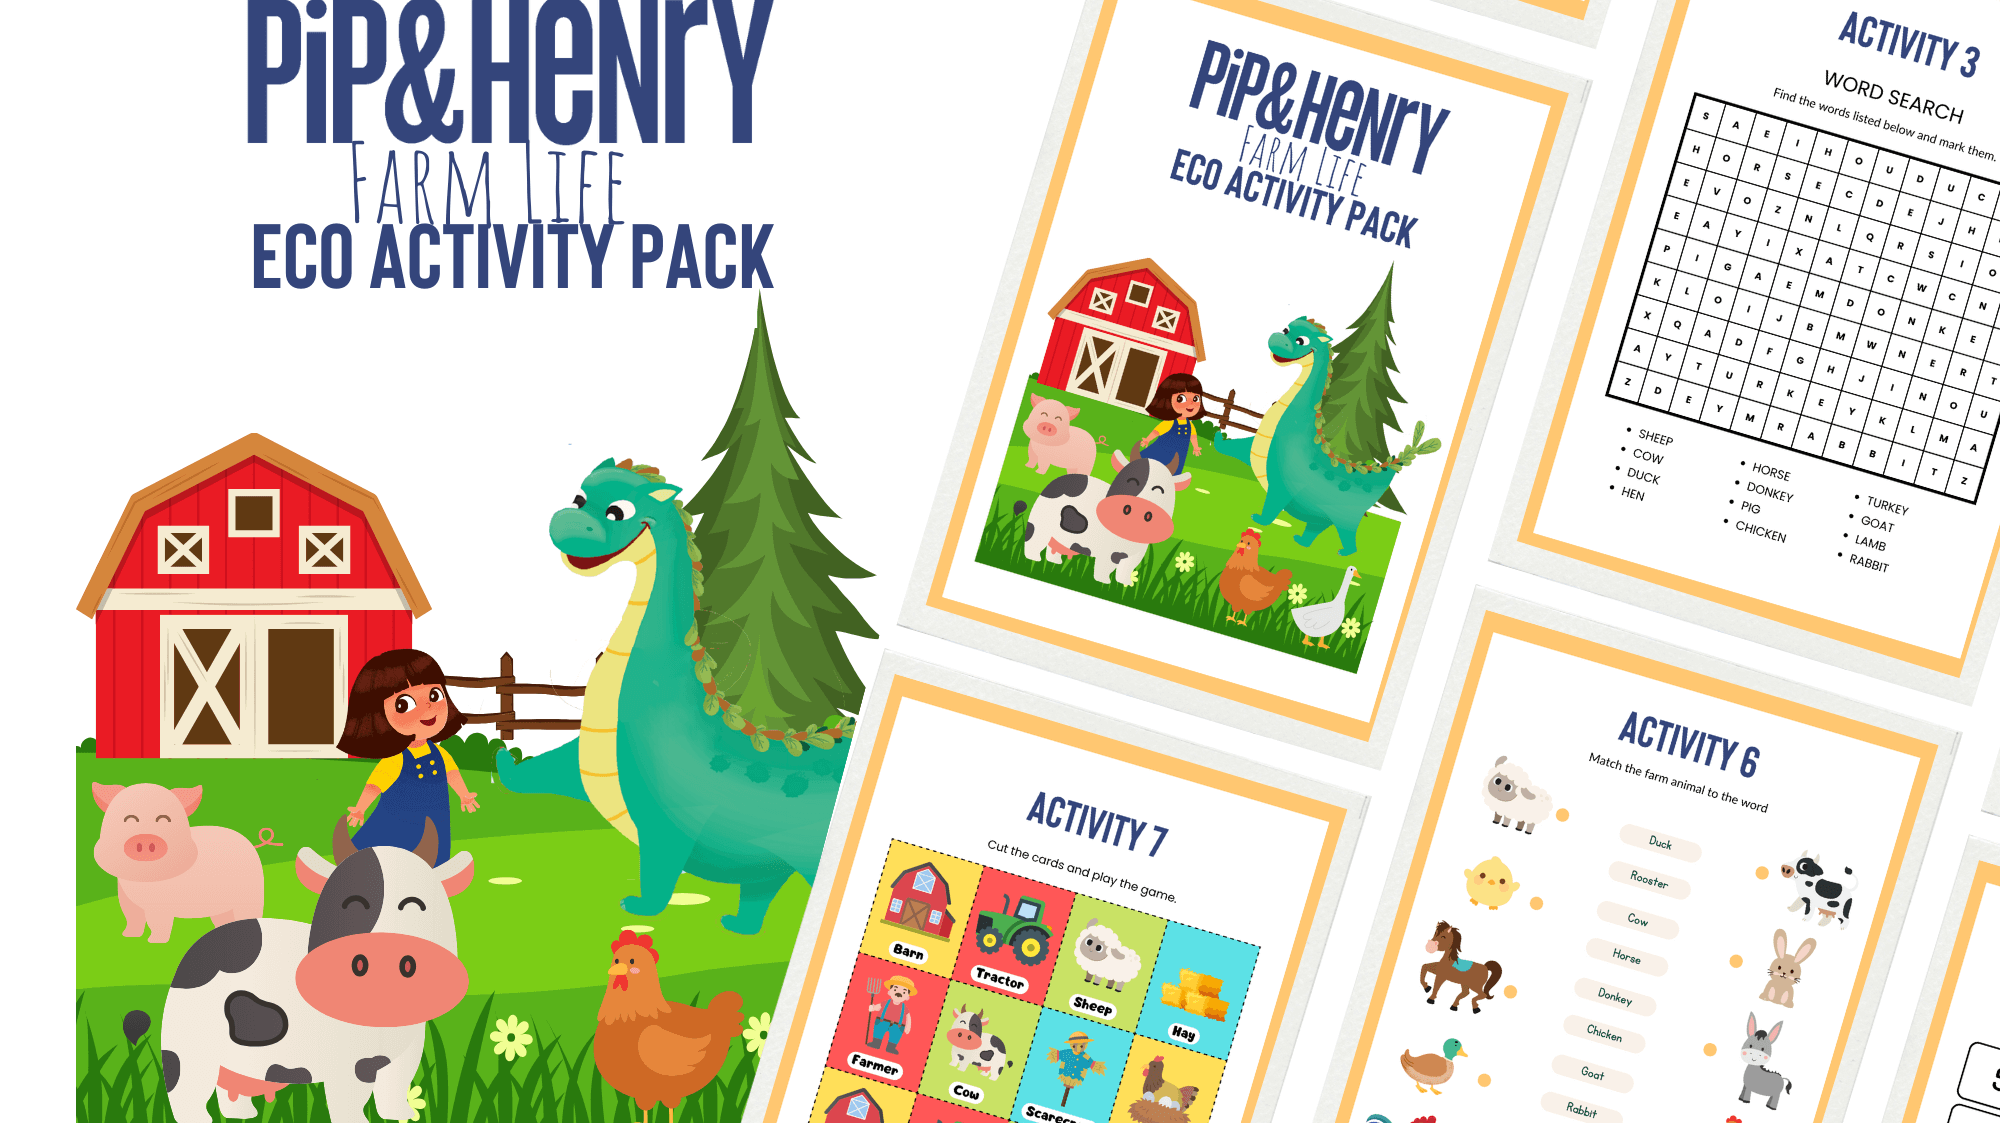 Our Farm Life Eco Activity Pack Is Here!